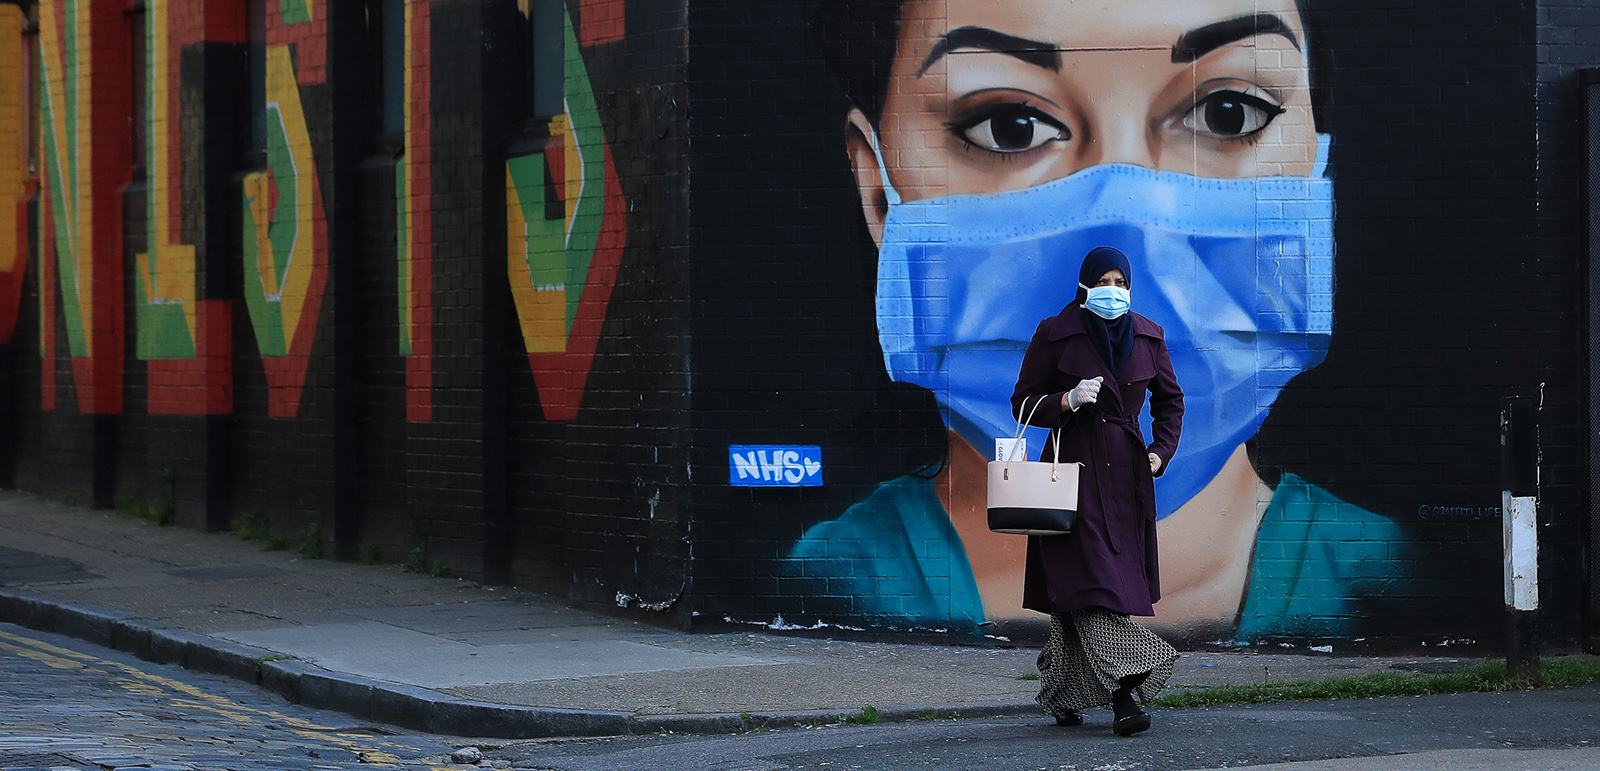 A woman wearing a face mask walks past an NHS mural during the Covid pandemic in April, 2020 in Shoreditch, London